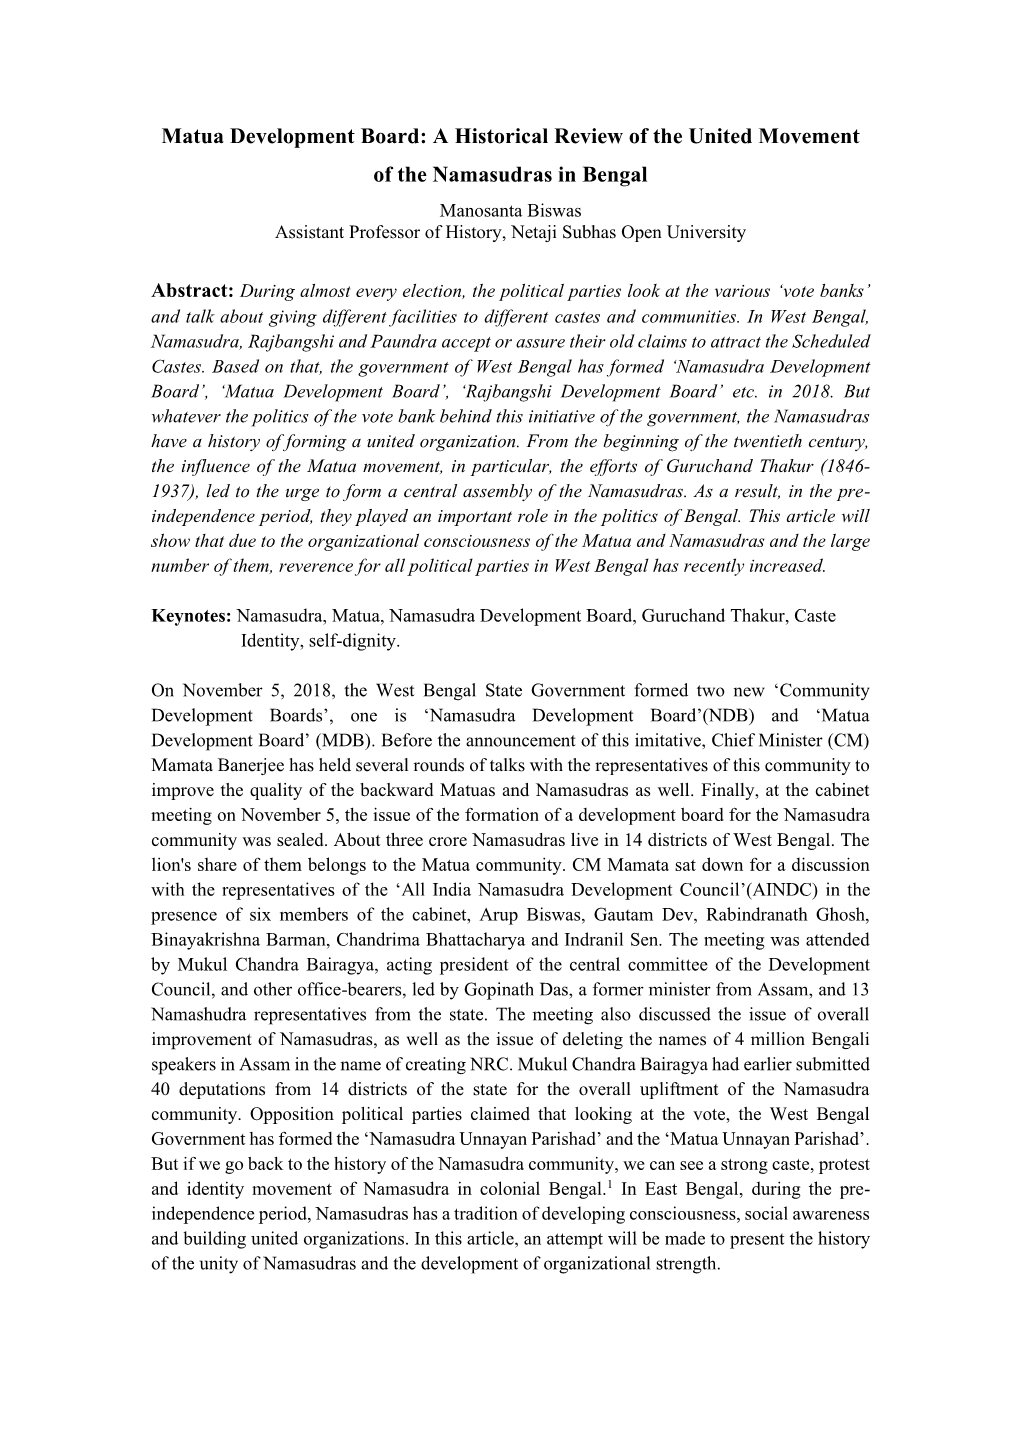 Matua Development Board: a Historical Review of the United Movement of the Namasudras in Bengal